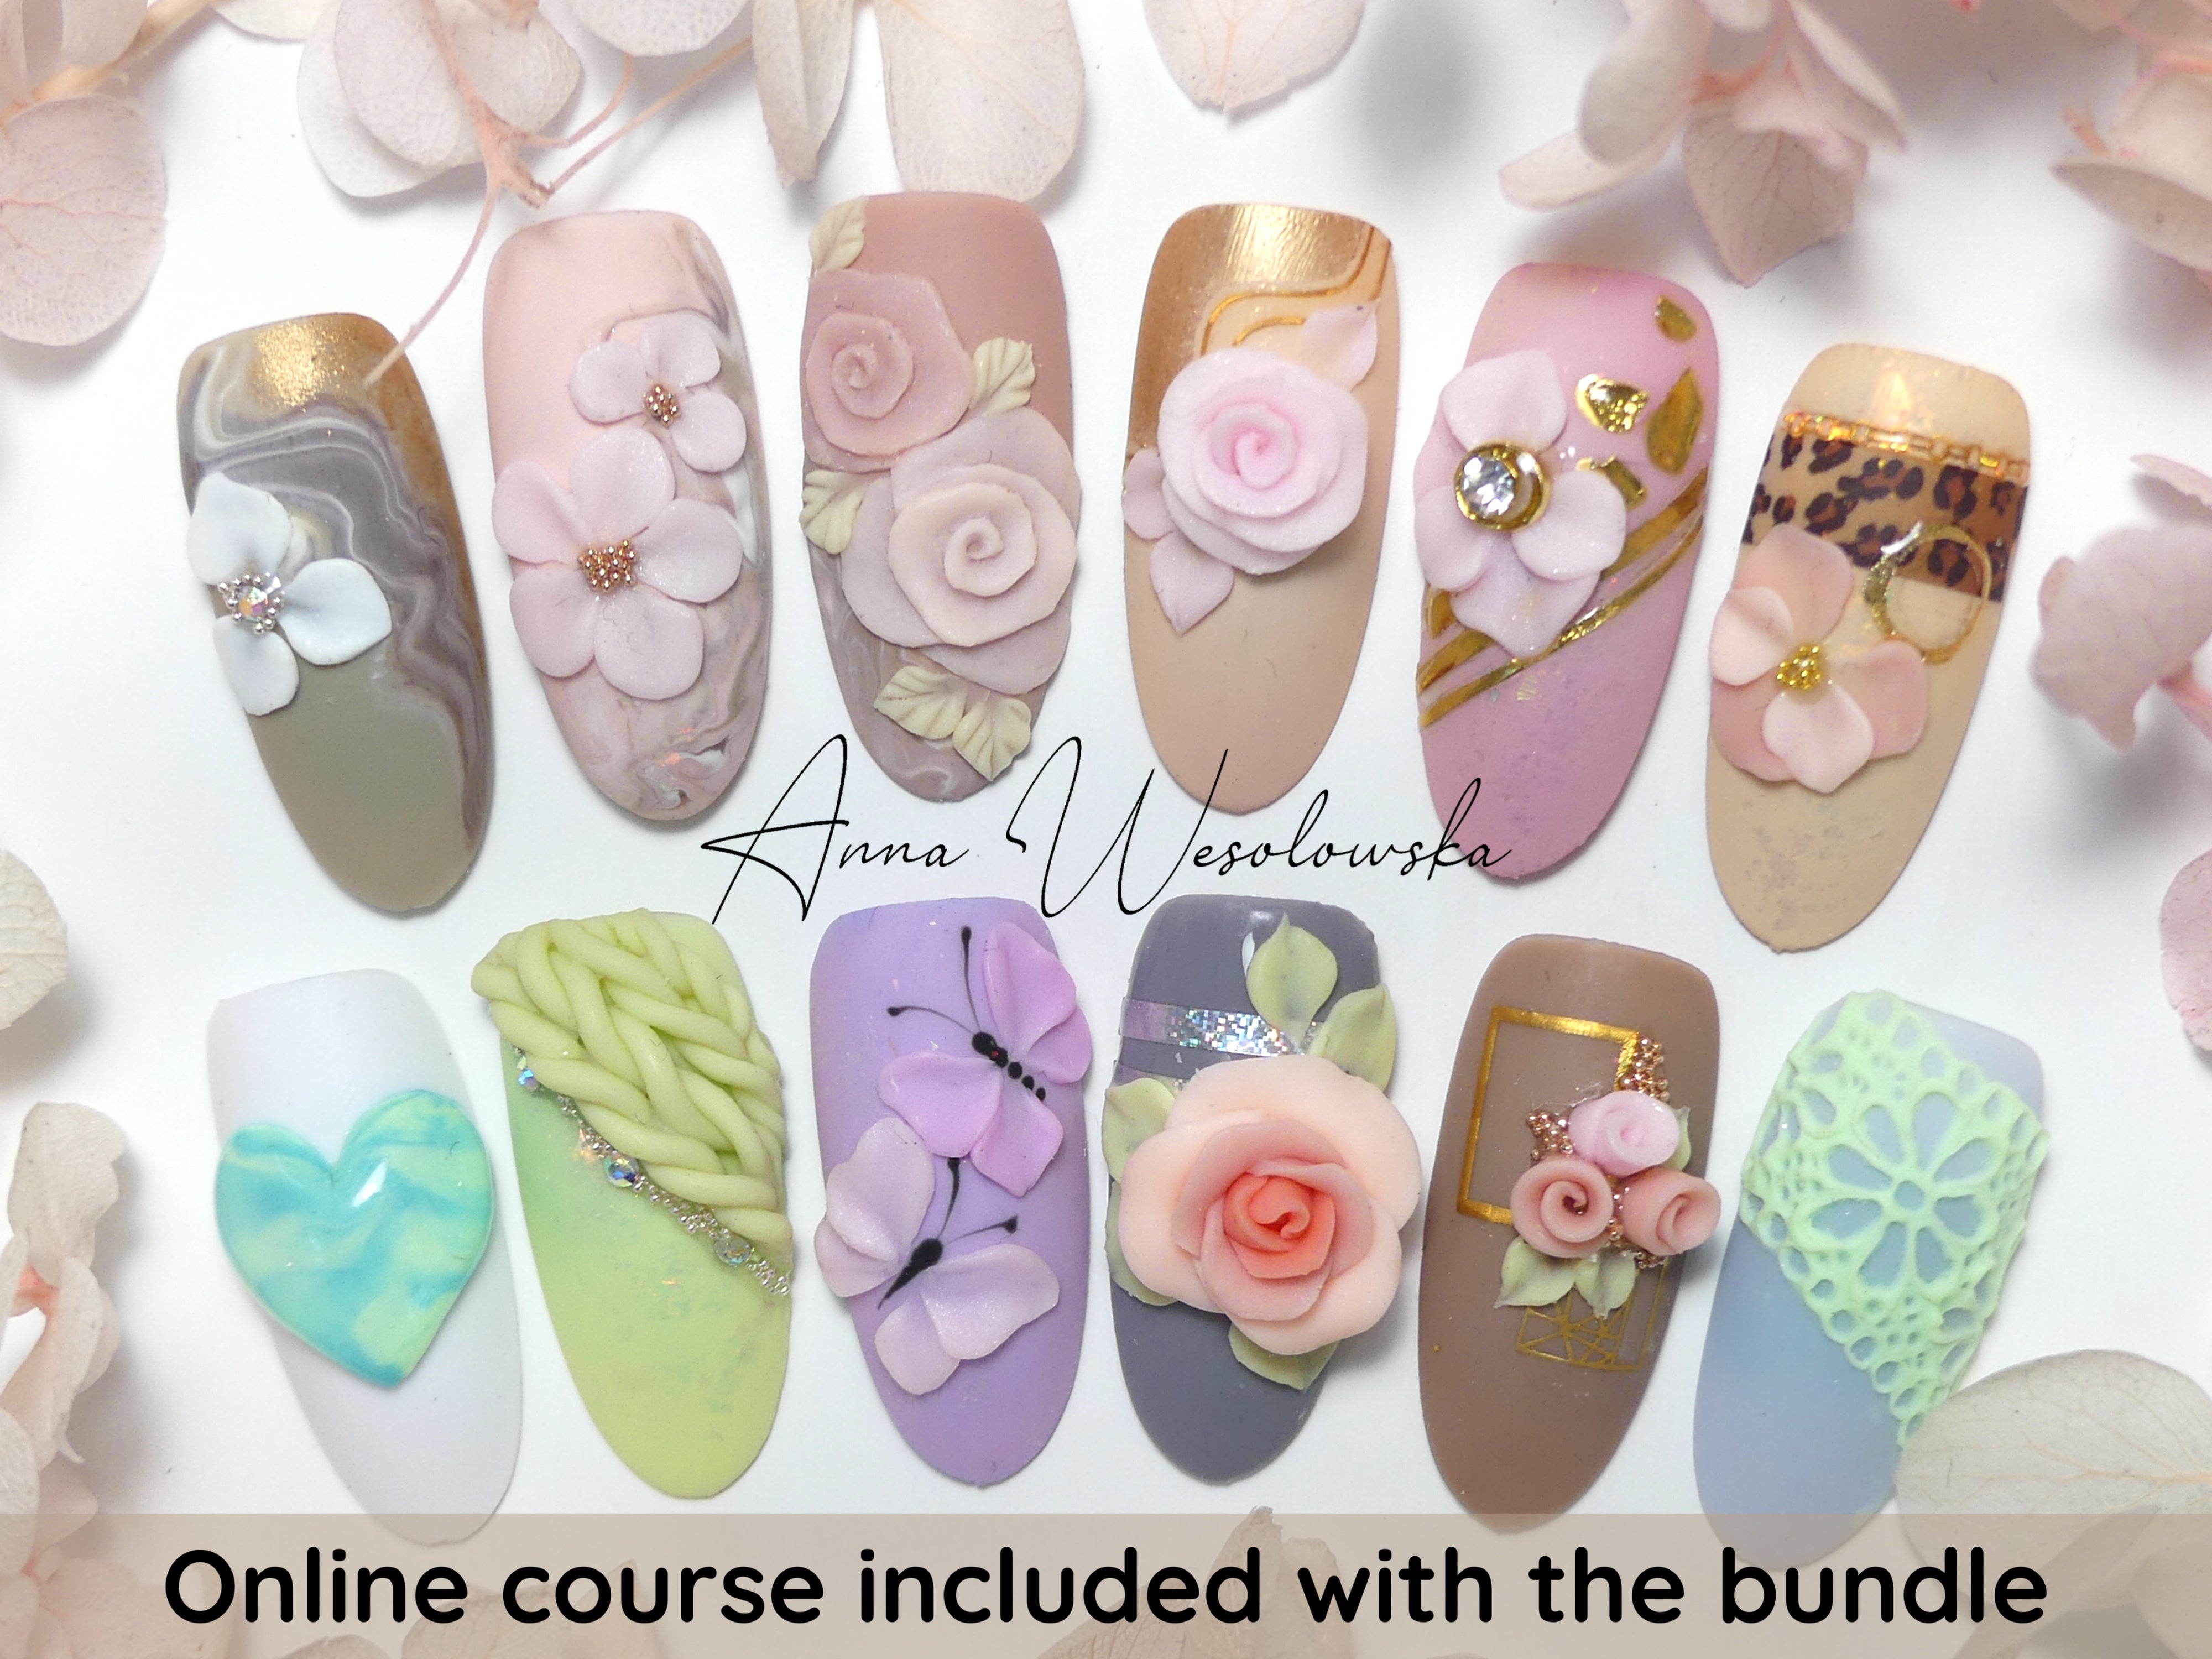 Free online course on nail designs | Glitter gel nails, Glittery nails,  Acrylic nails coffin short